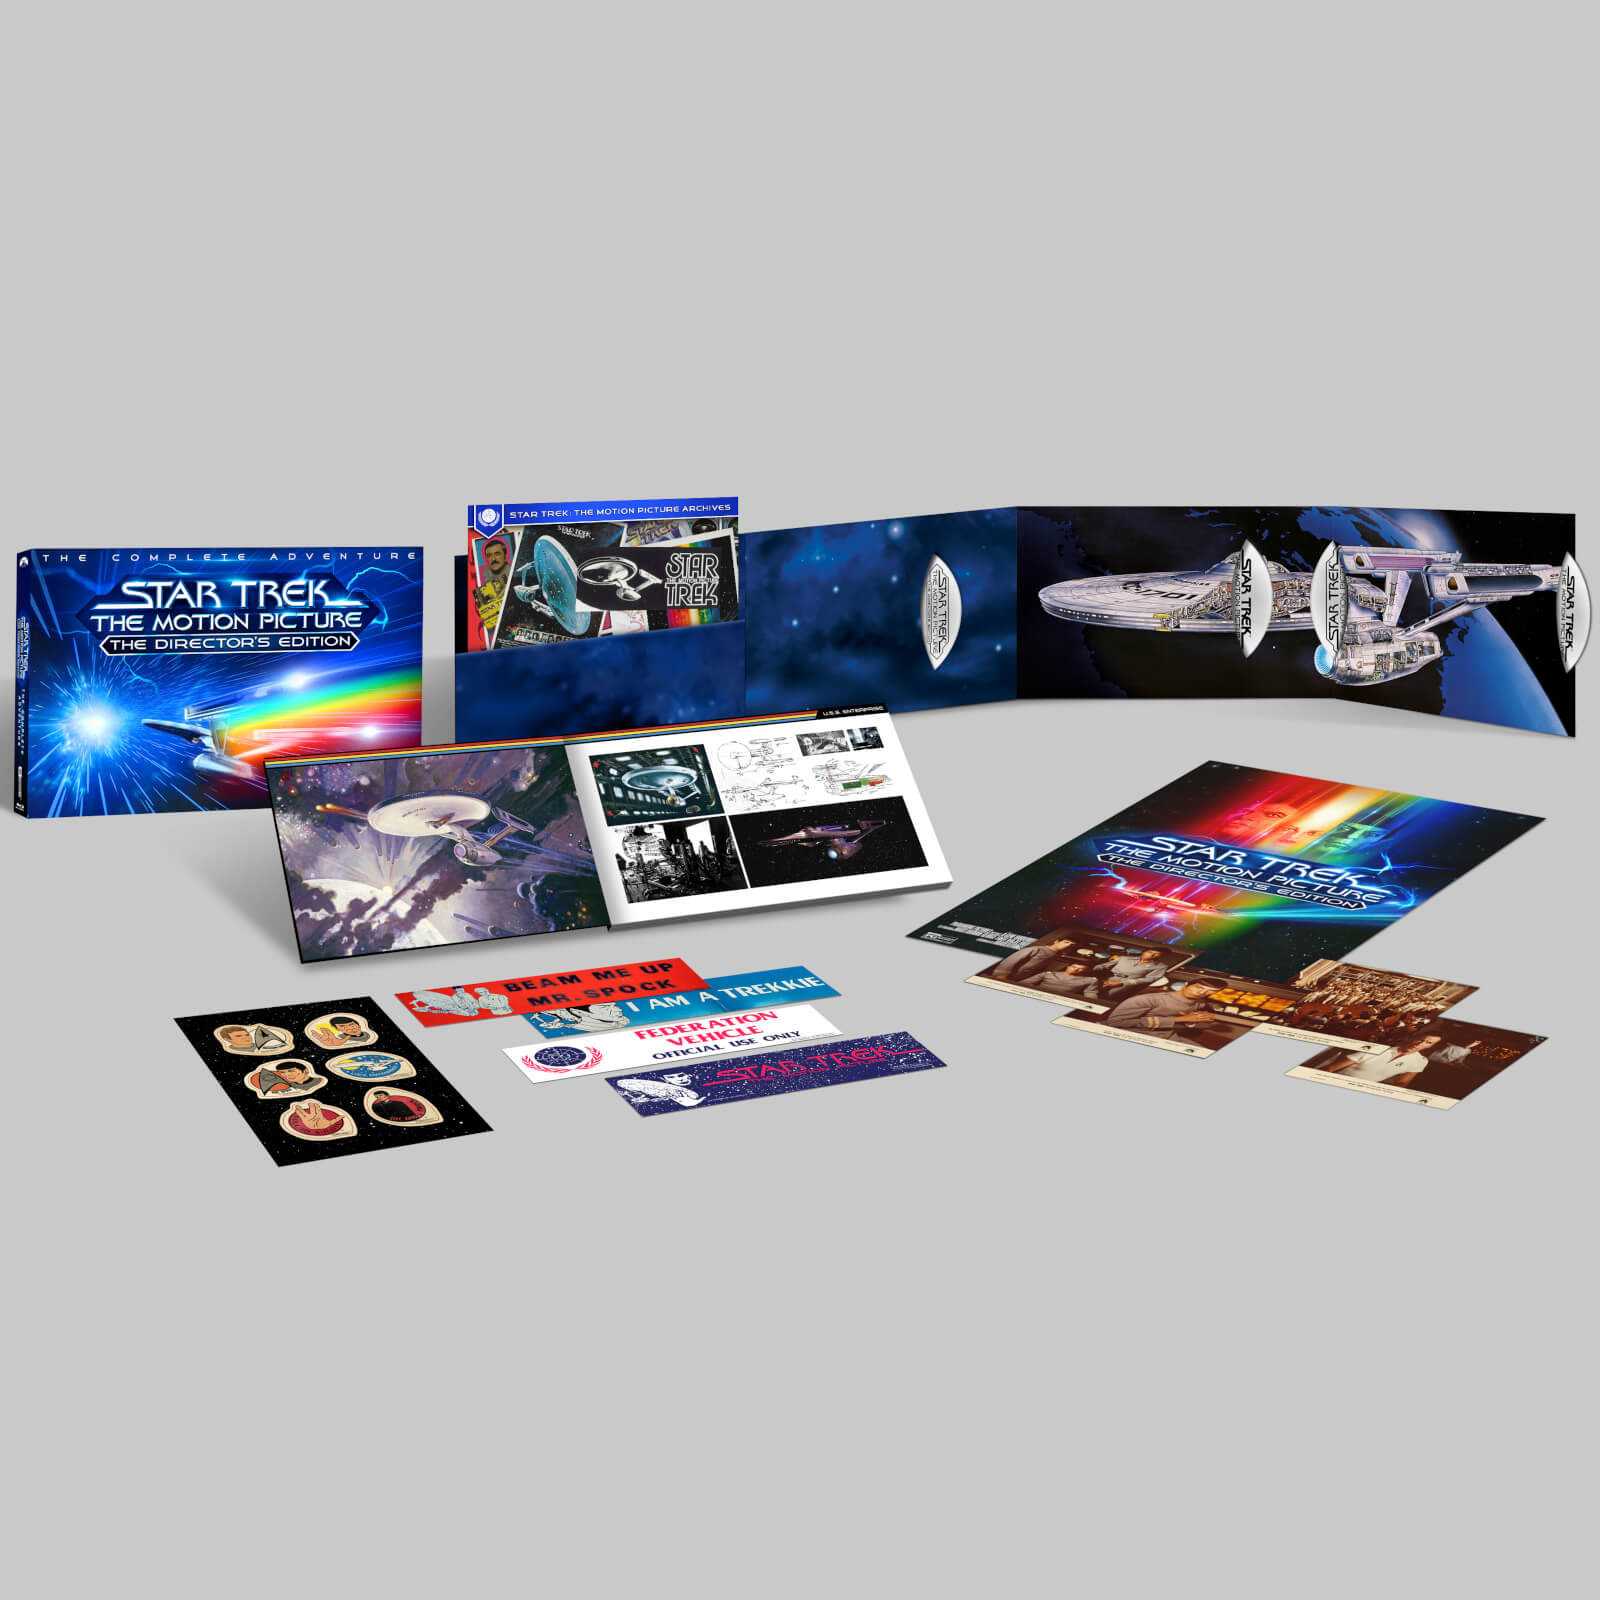 Paramount Home Entertainment Star trek: the motion picture - the director's edition - the complete adventure